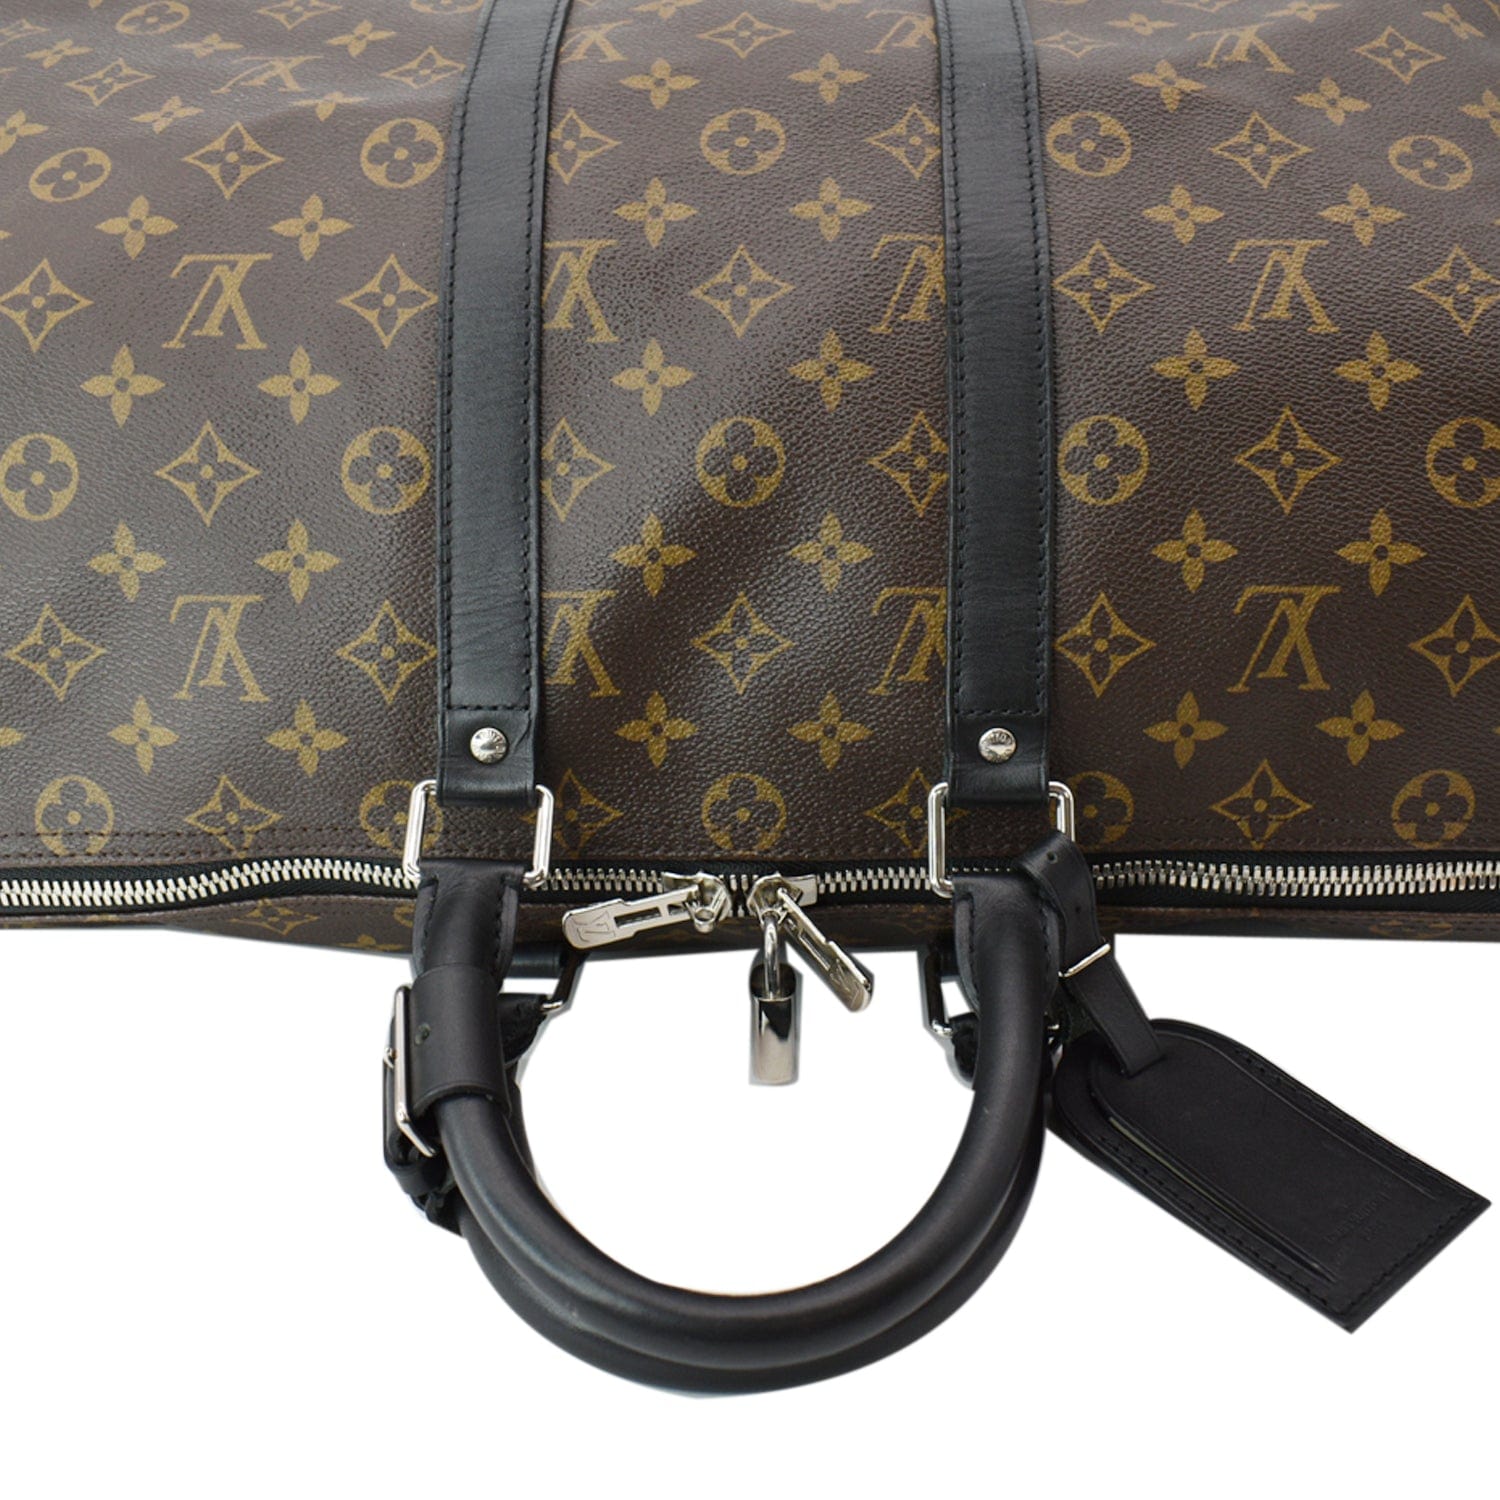 Exceptional Louis Vuitton Keepall travel bag 50 shoulder strap in brown  monogram canvas and natural leather customized CHAMPAGNE X FRENCH LUXURY  by the Street Art artist PatBo Cloth ref.730254 - Joli Closet